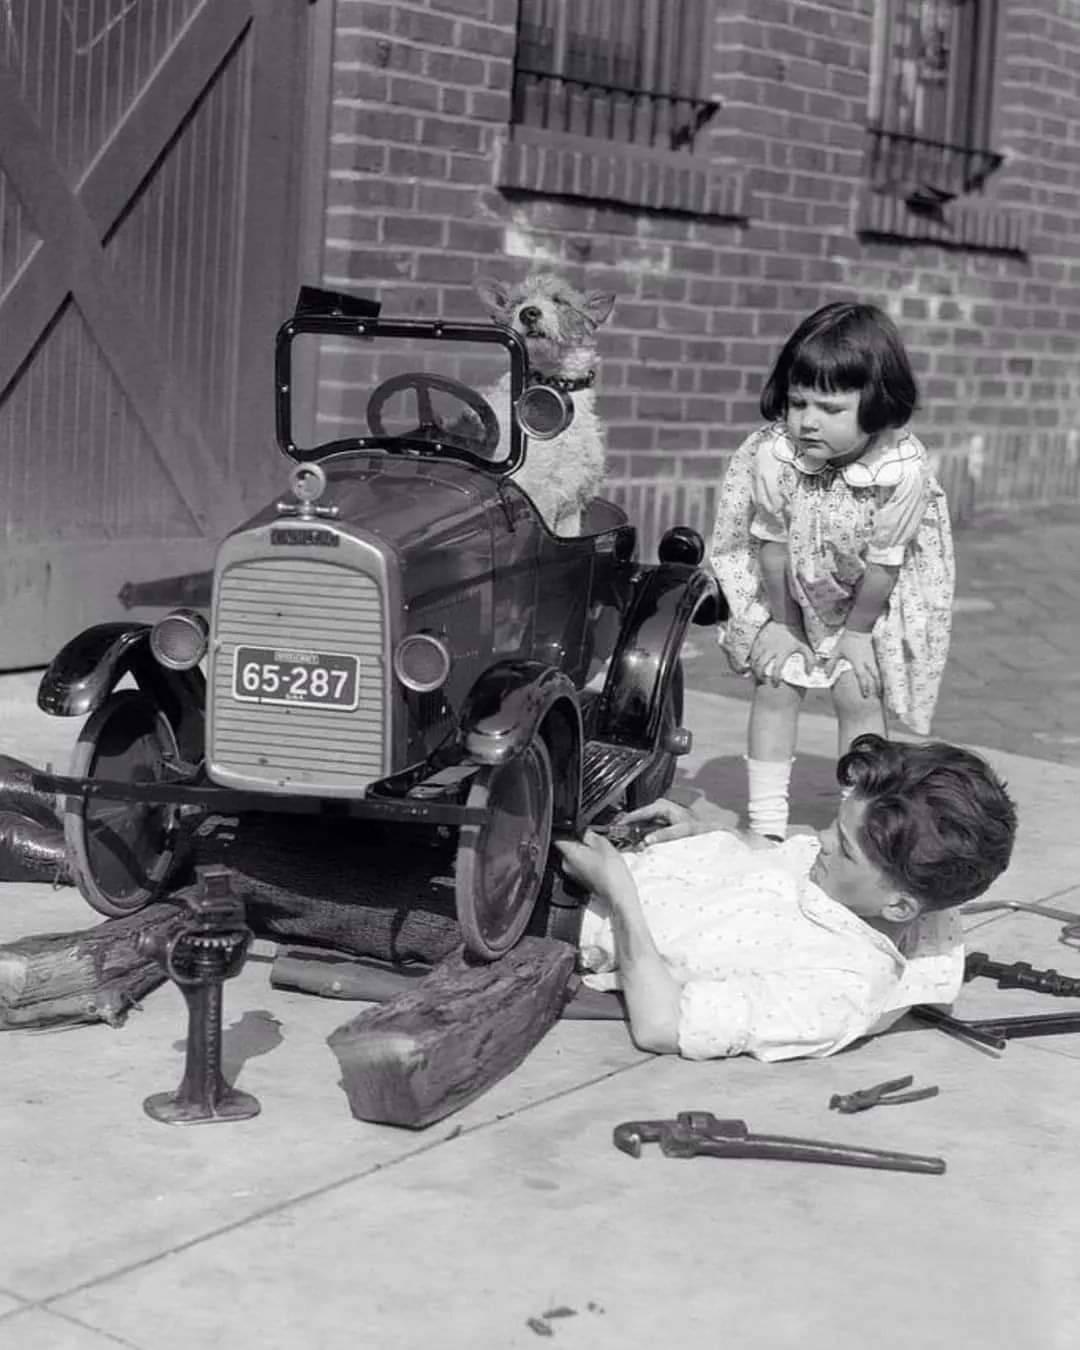 Little girl leaning down watching boy working under toy car with dog behind wheel (1920s).jpg